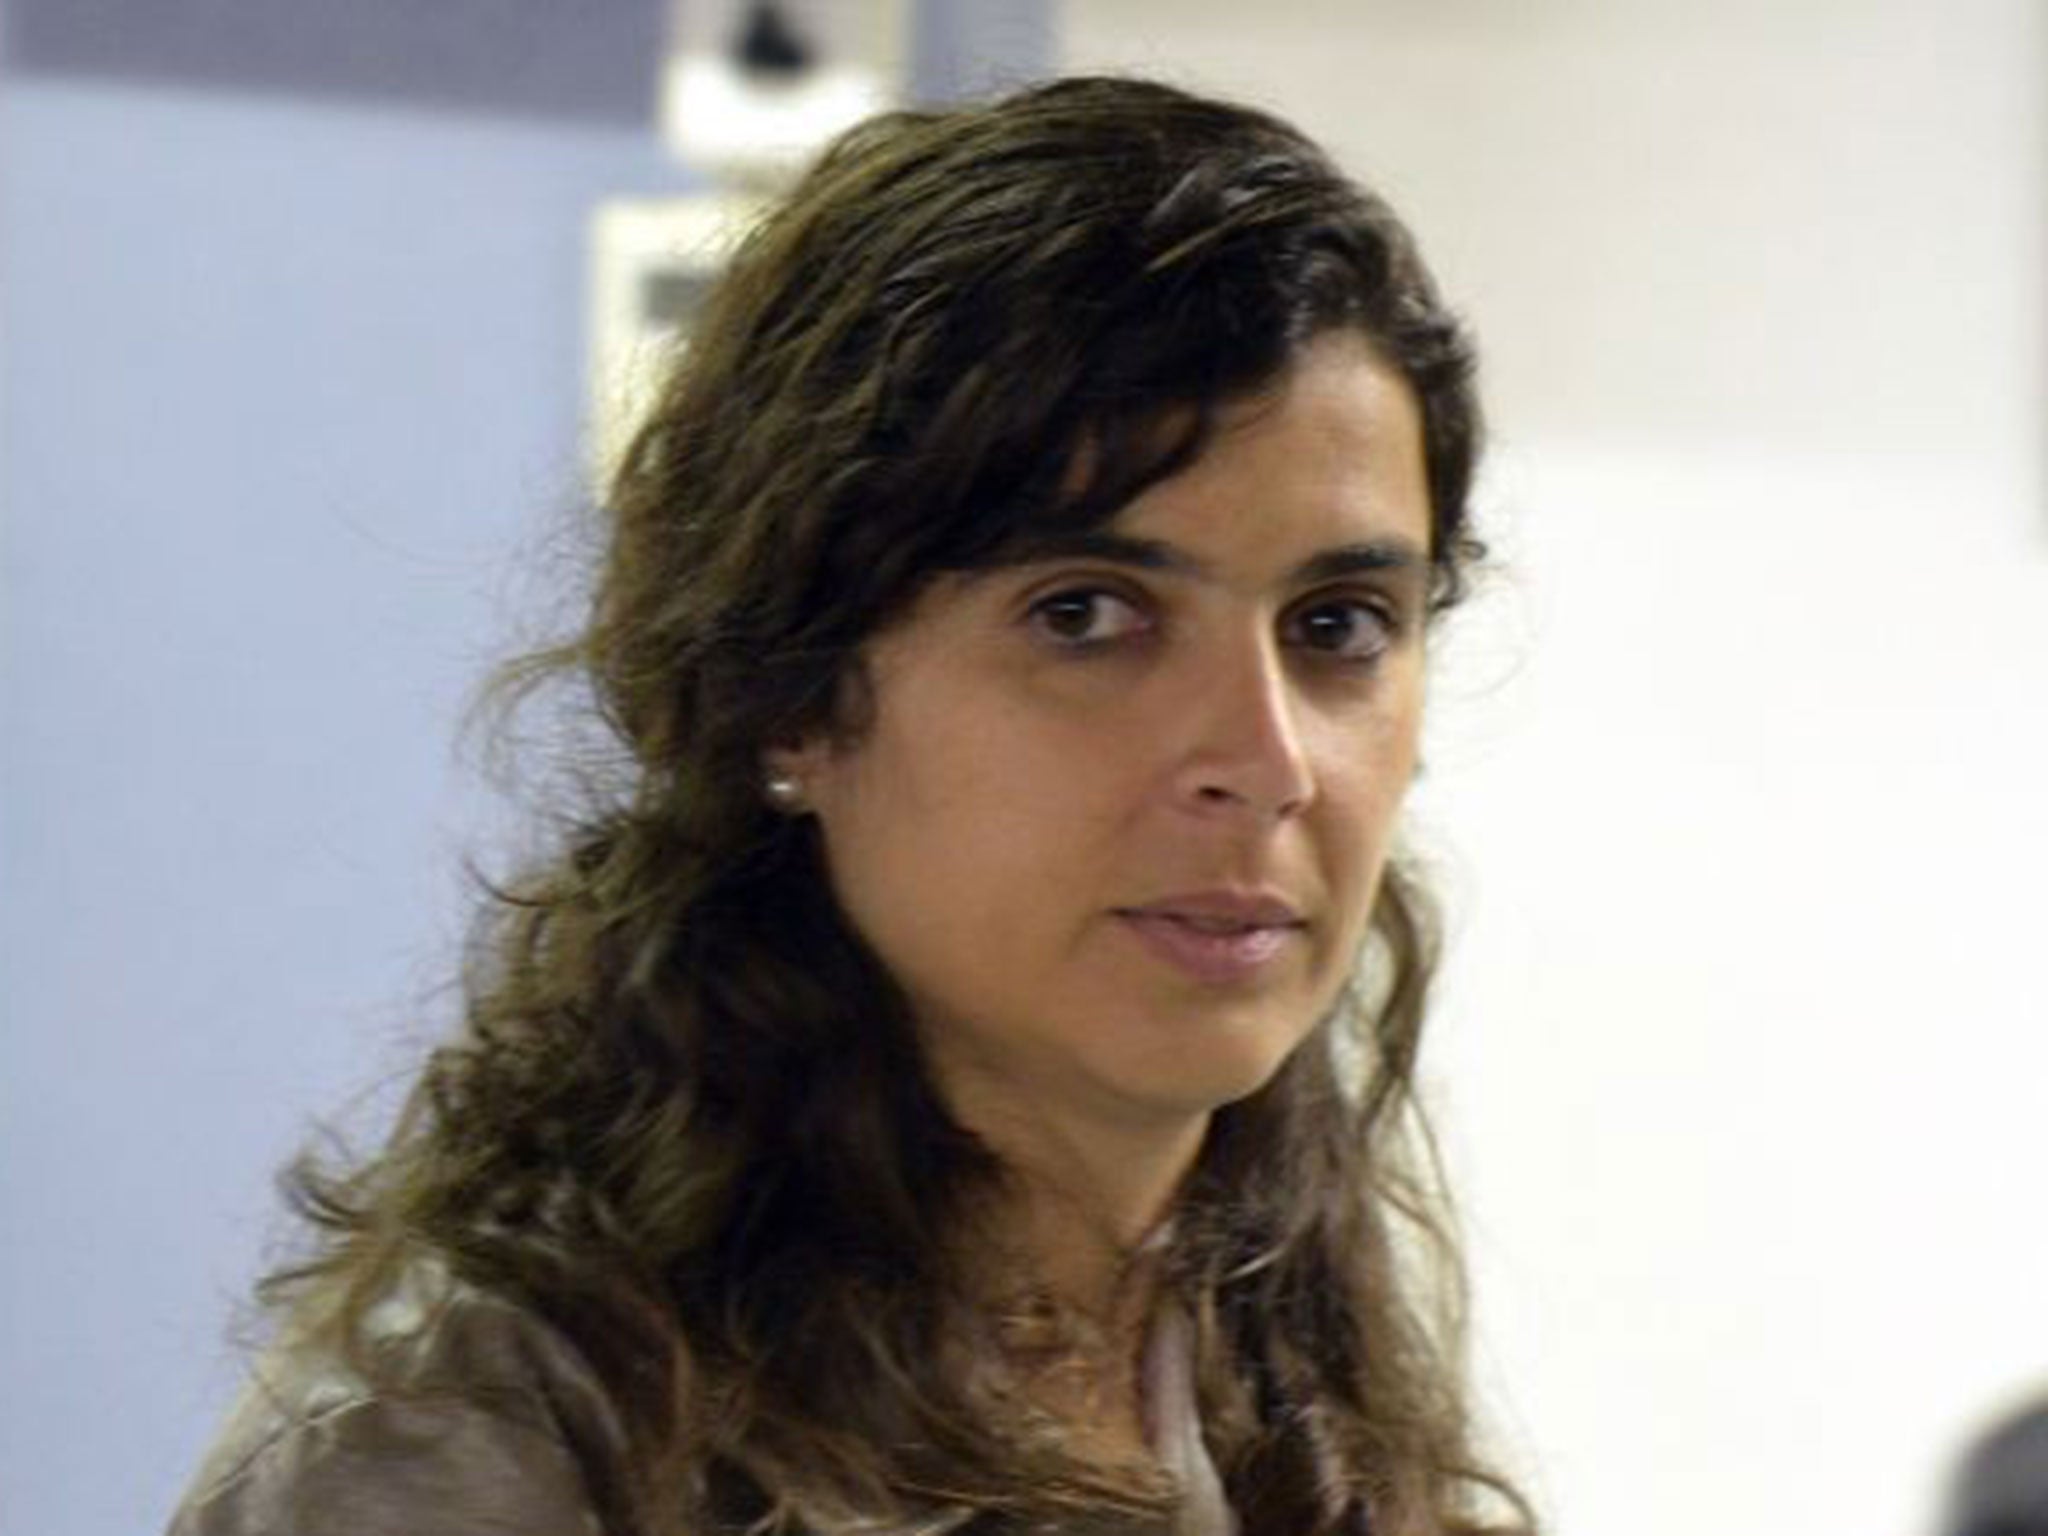 Helena Costa said she was hired by Clermont Foot to attract publicity but would have no real authority